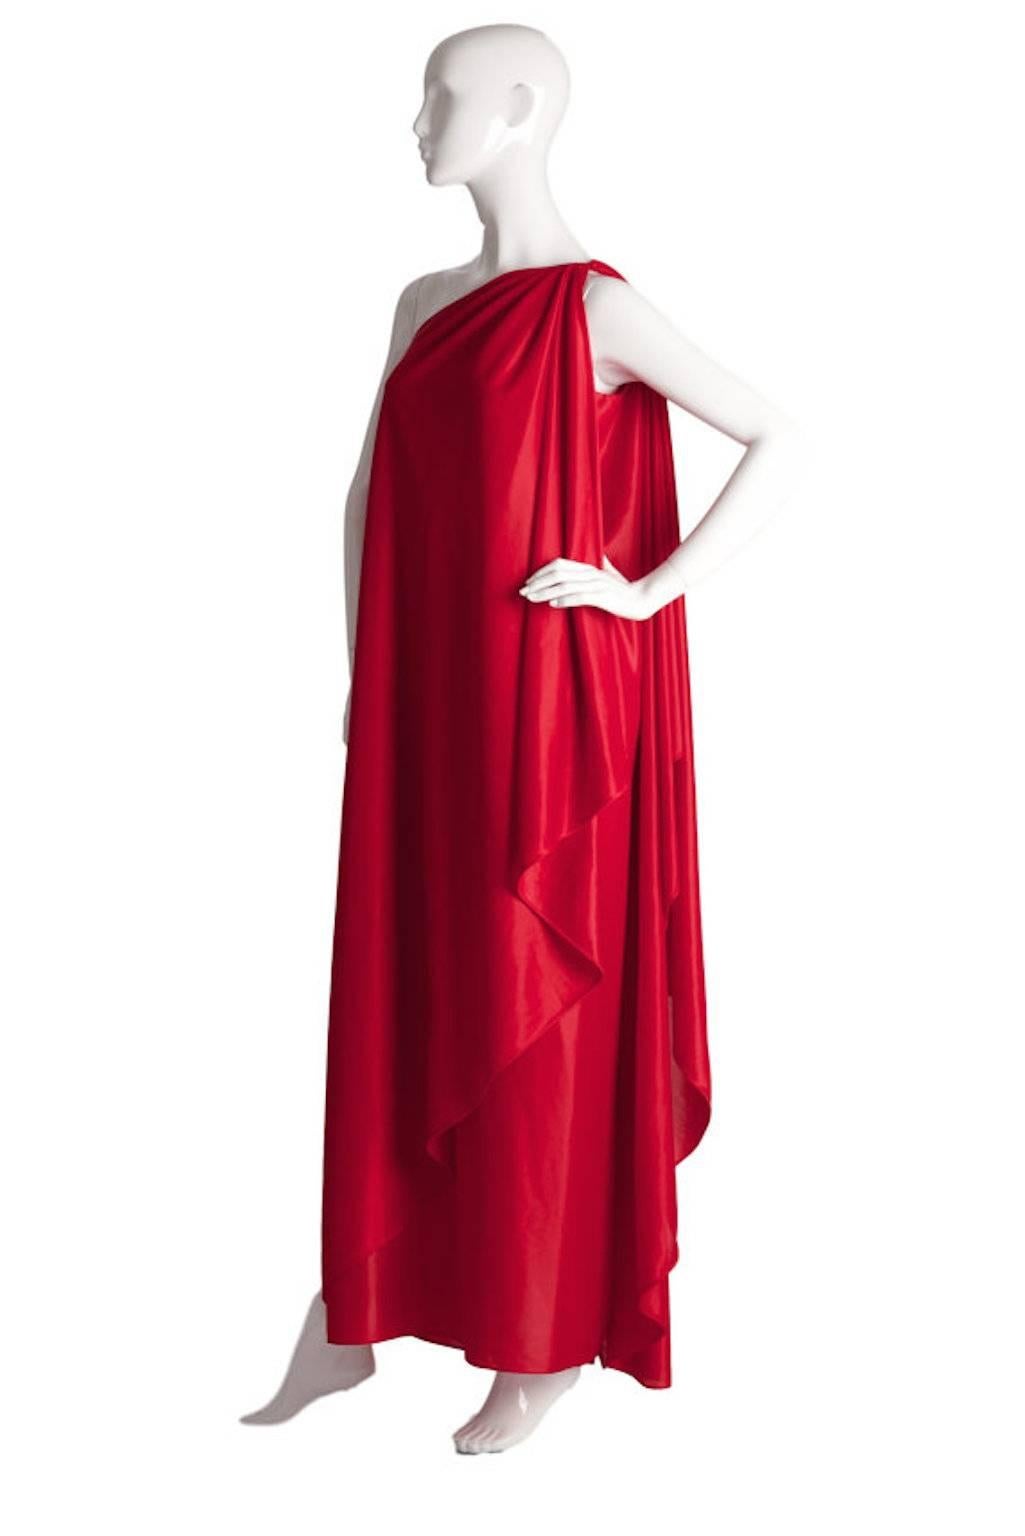 Vintage Halston IV Dorian 1970s one shoulder grecian dress. Made from draped jersey, fastens on the shoulder with hook/eye.

Size UK 10 measuring 18 inches across bust and 58 inches length
